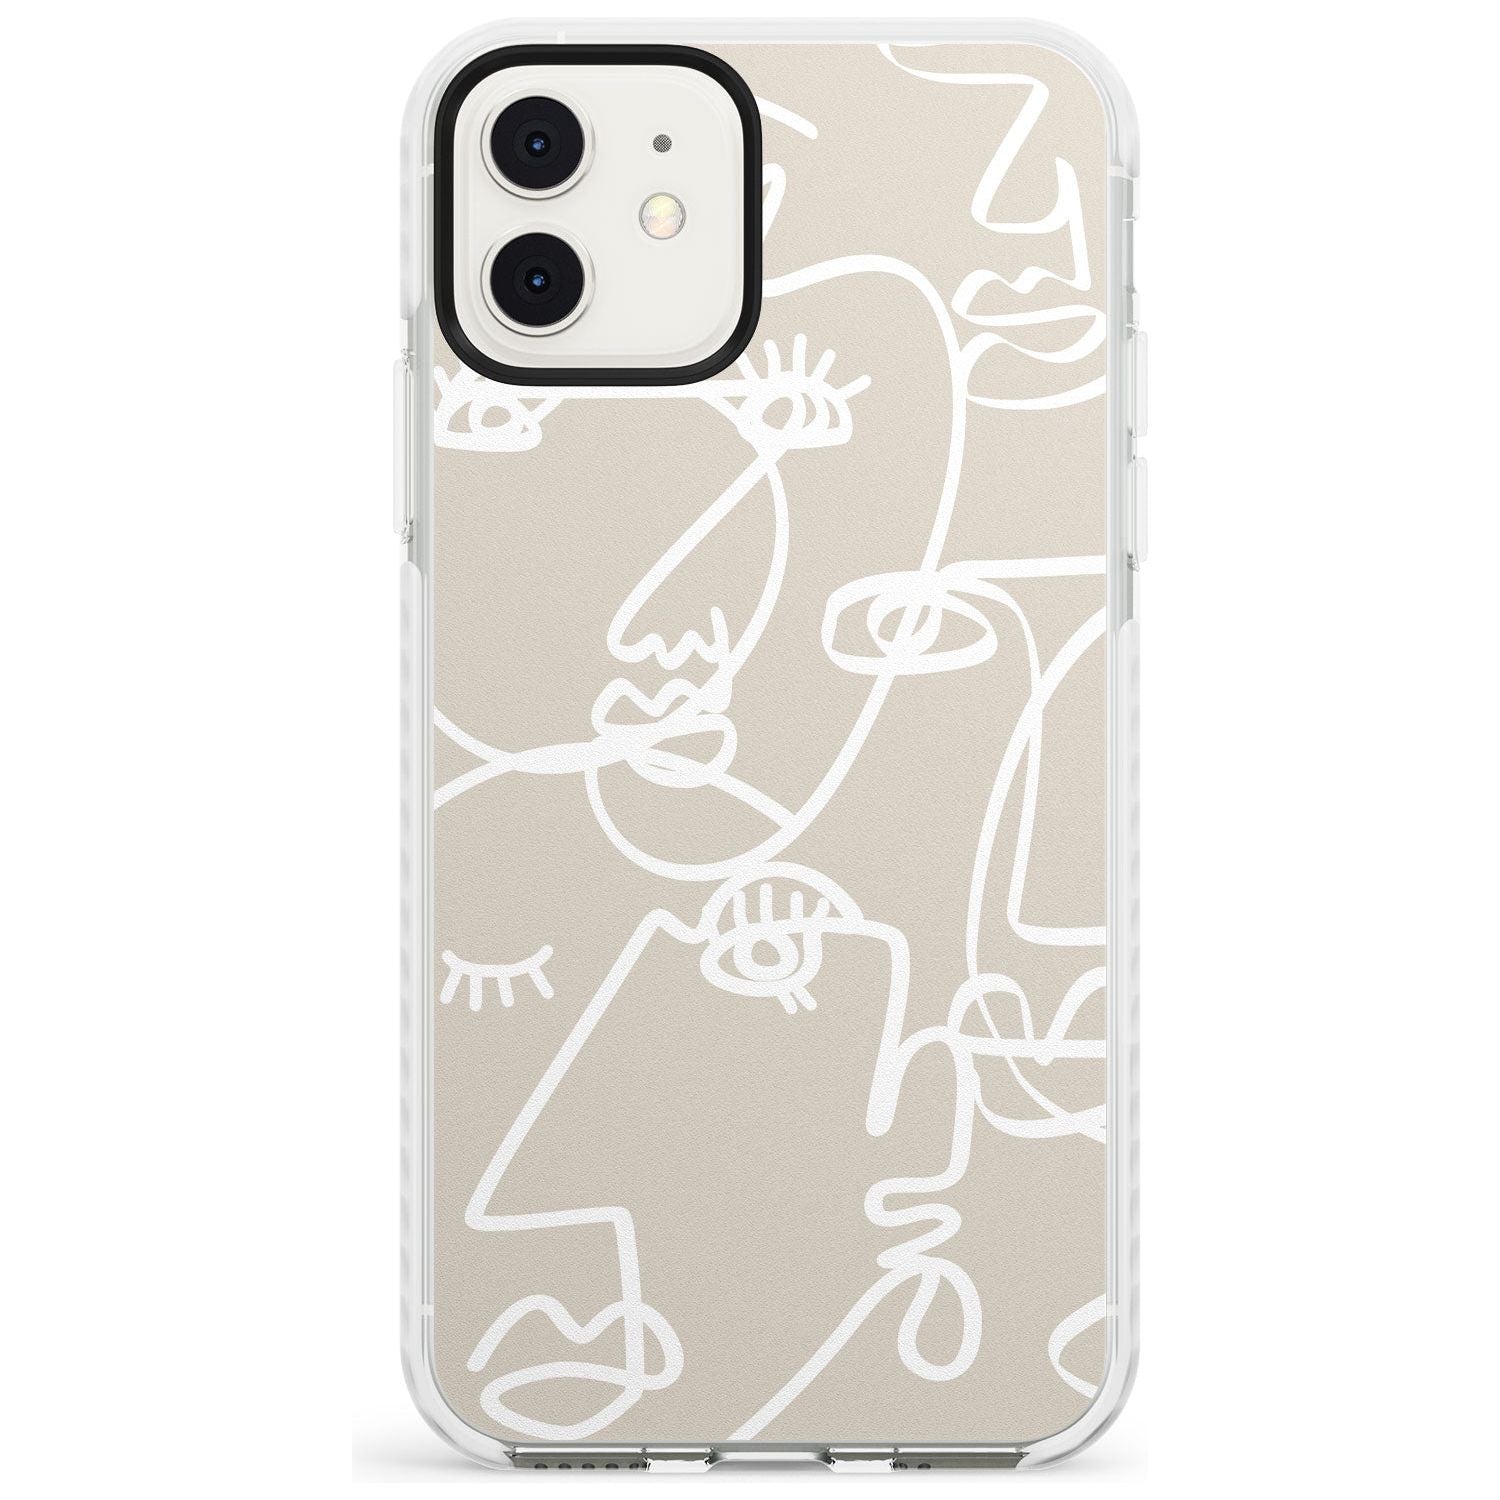 Continuous Line Faces: White on Beige Slim TPU Phone Case for iPhone 11